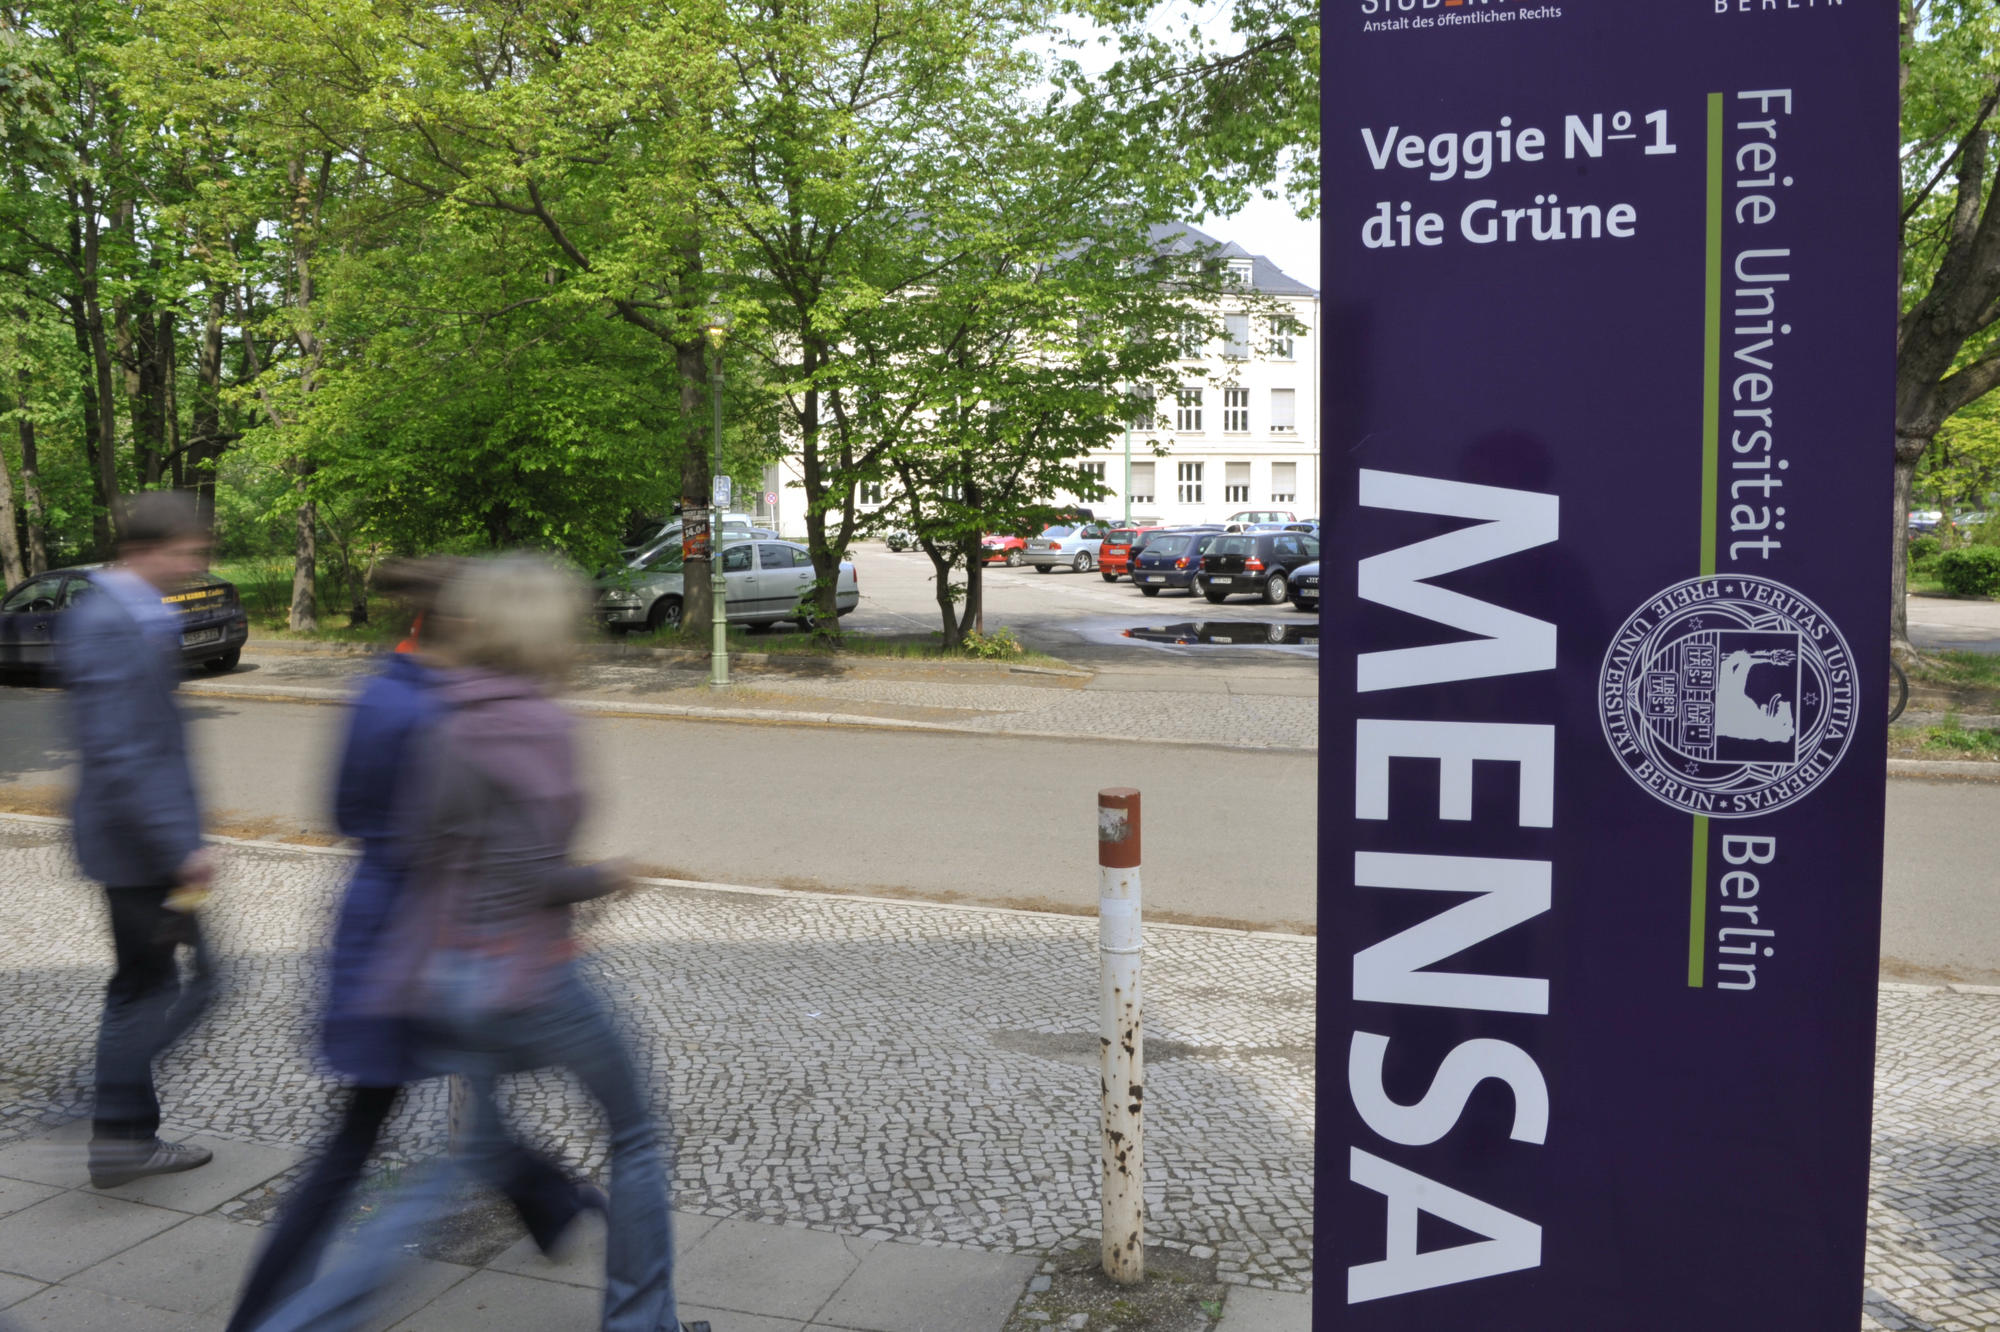 Nutrition trend: Germany's first campus vegetarian dining hall opened at Freie Universität: Veggie No 1.